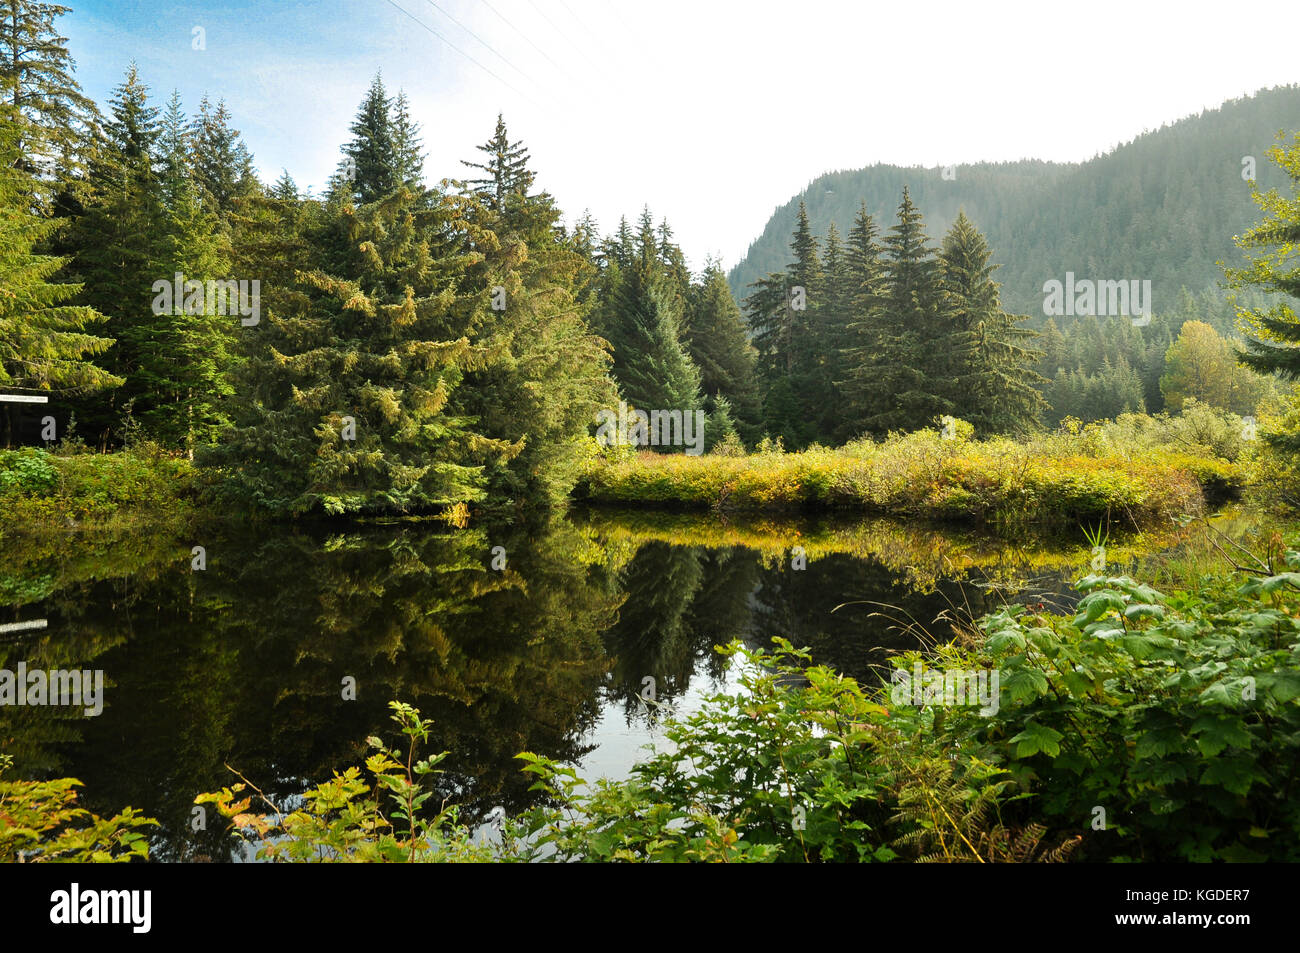 Alaskan Forest with small lake in front Stock Photo